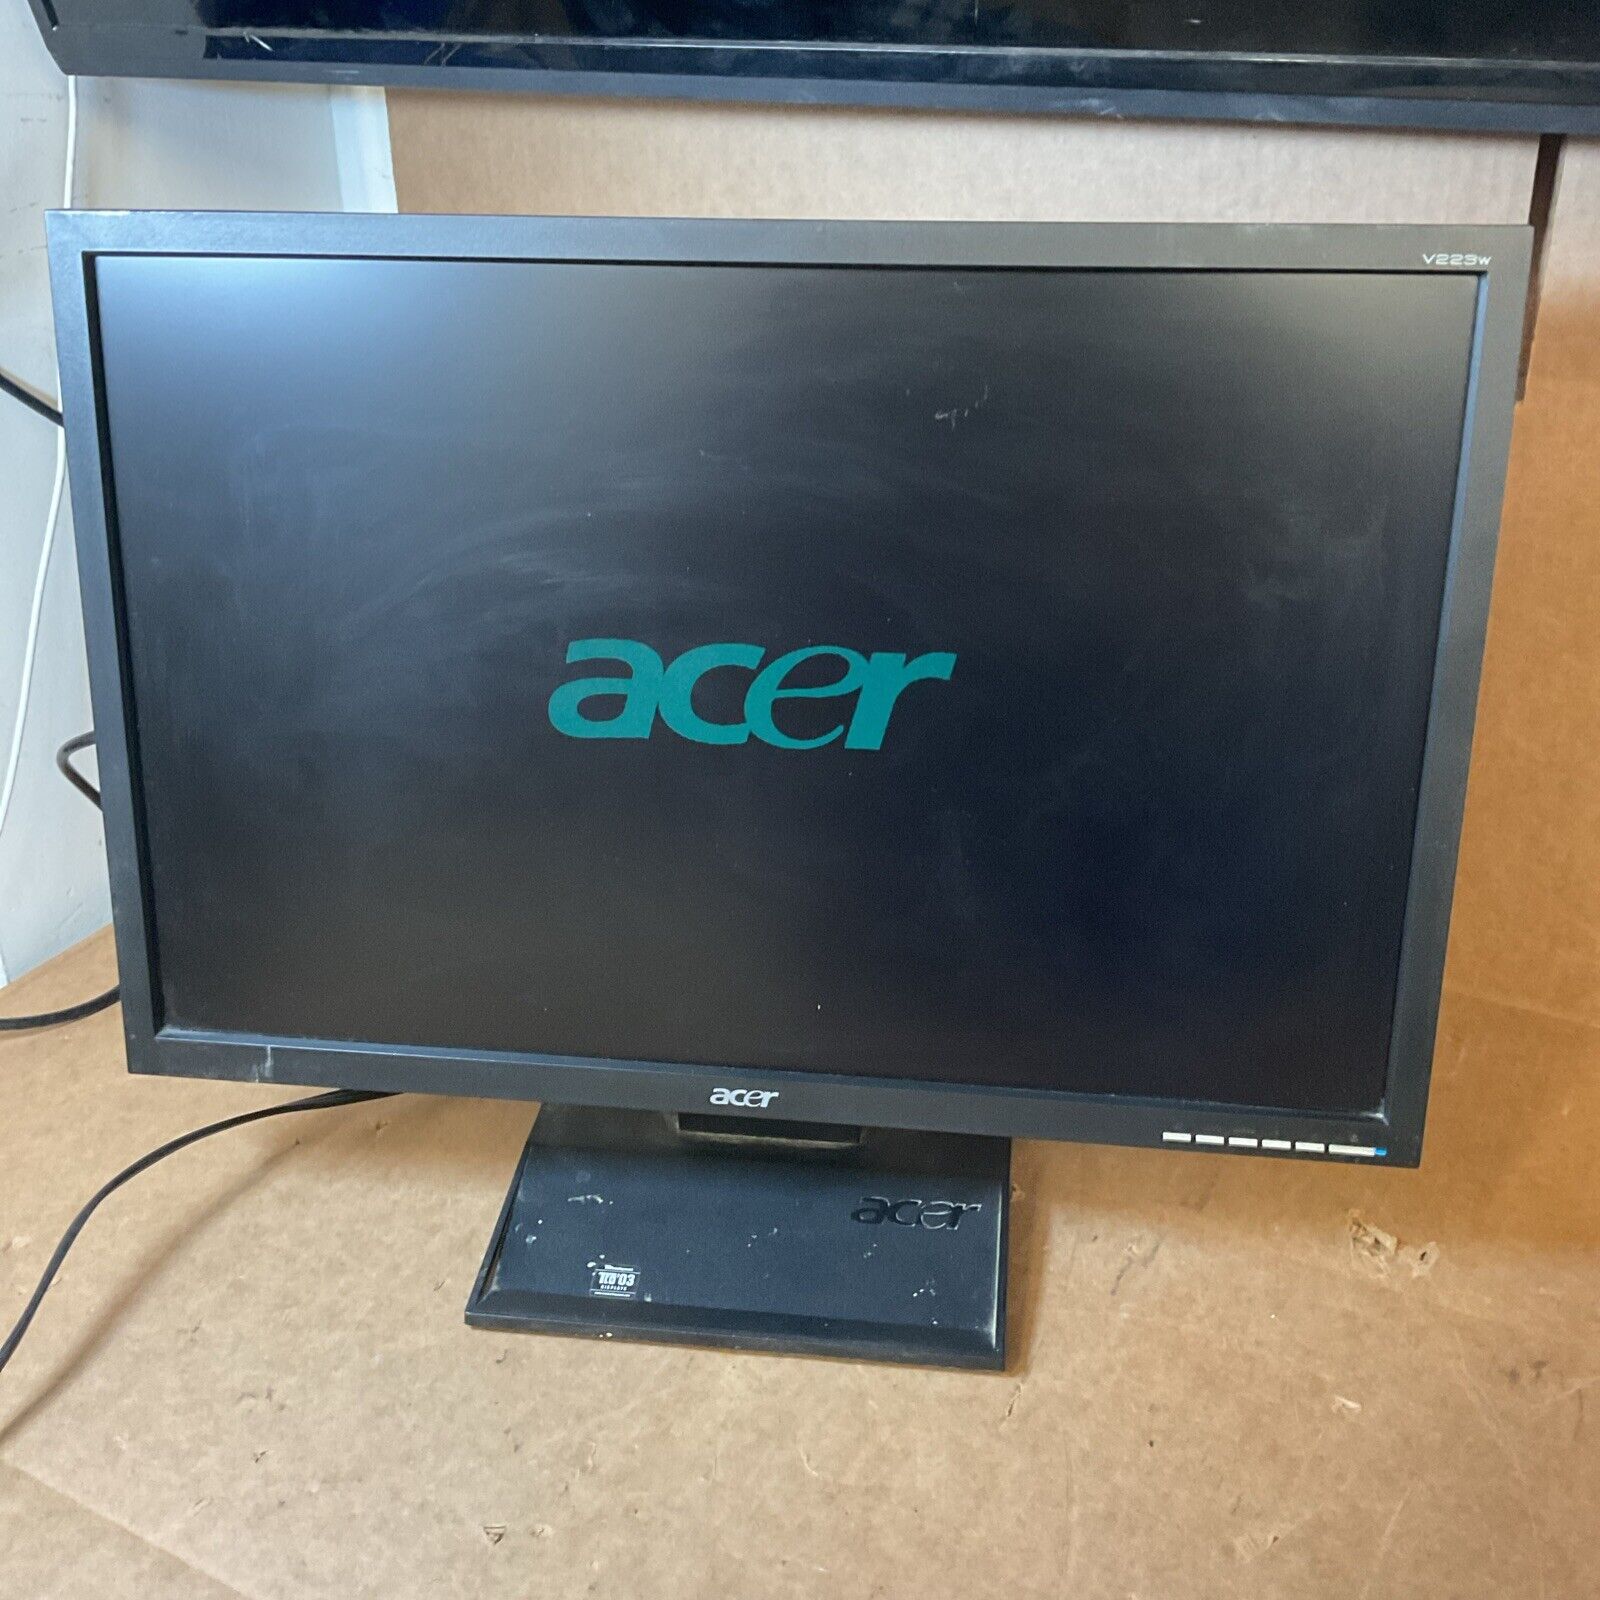 Acer V223W 22-inch 1680 x 1050 Resolution Widescreen LCD Monitor